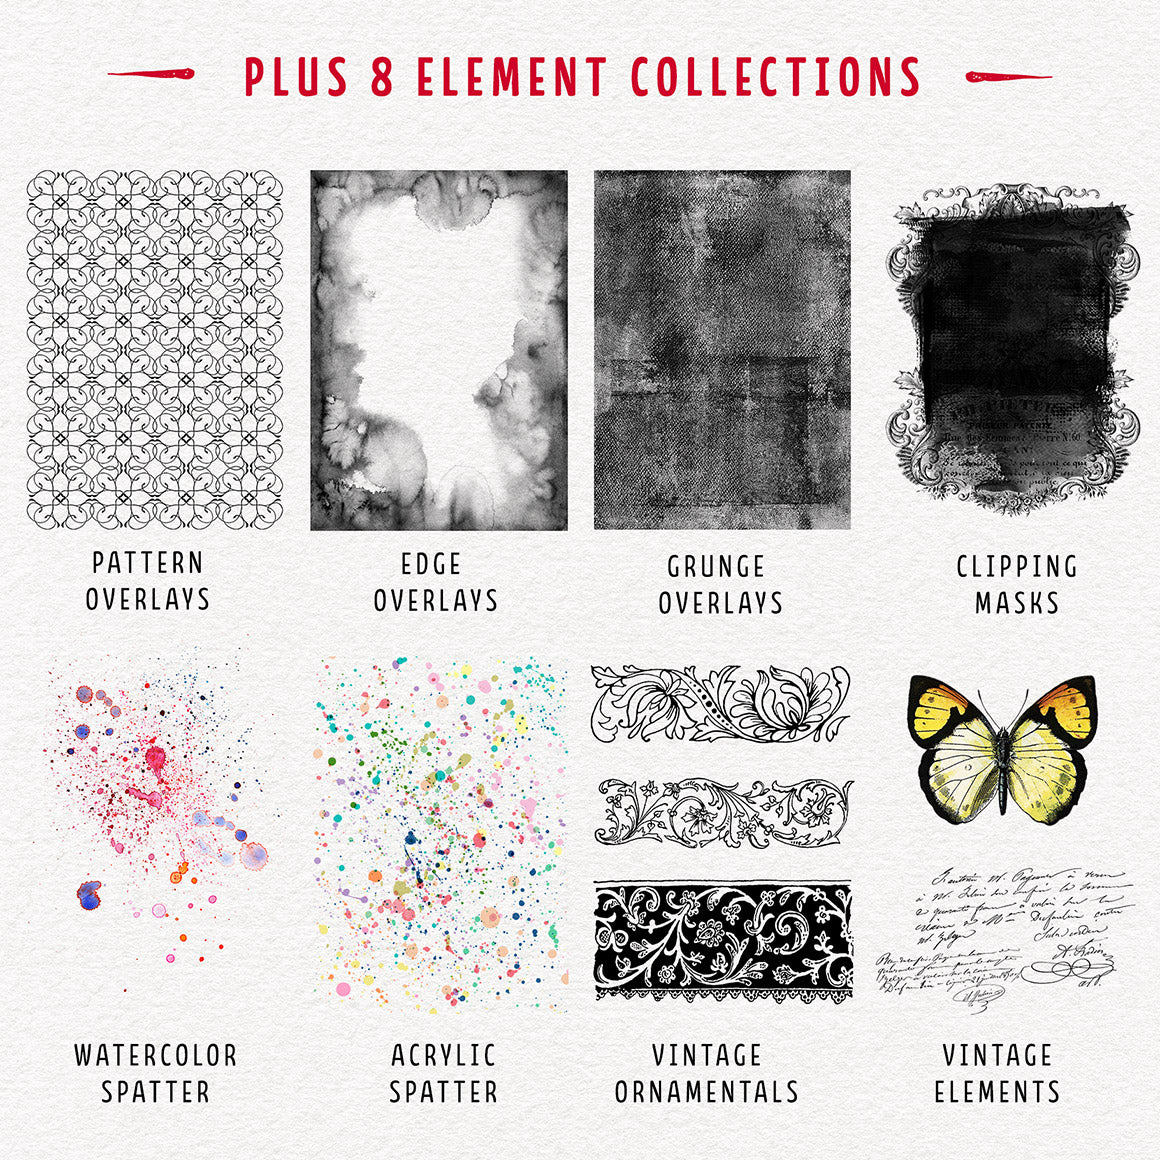 The 8 Element Collections in The Complete Inspirational Textures and Elements Collection.